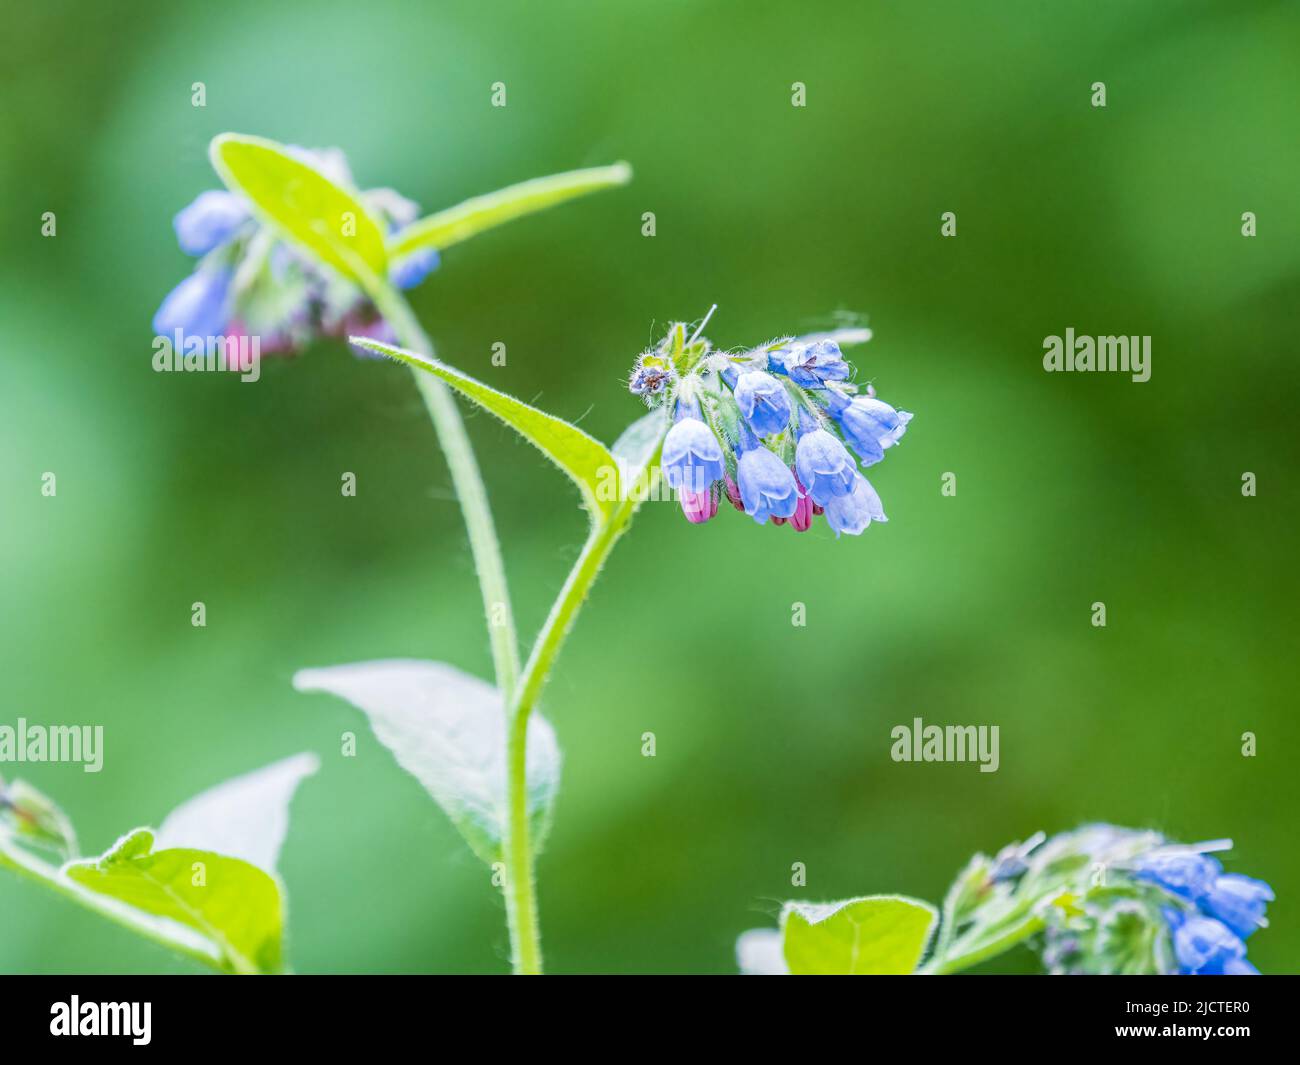 Beautiful blue flowers of Symphytum caucasicum, also known as the beinwell, blue comfrey, or Caucasian comfrey, blooming in spring park Stock Photo